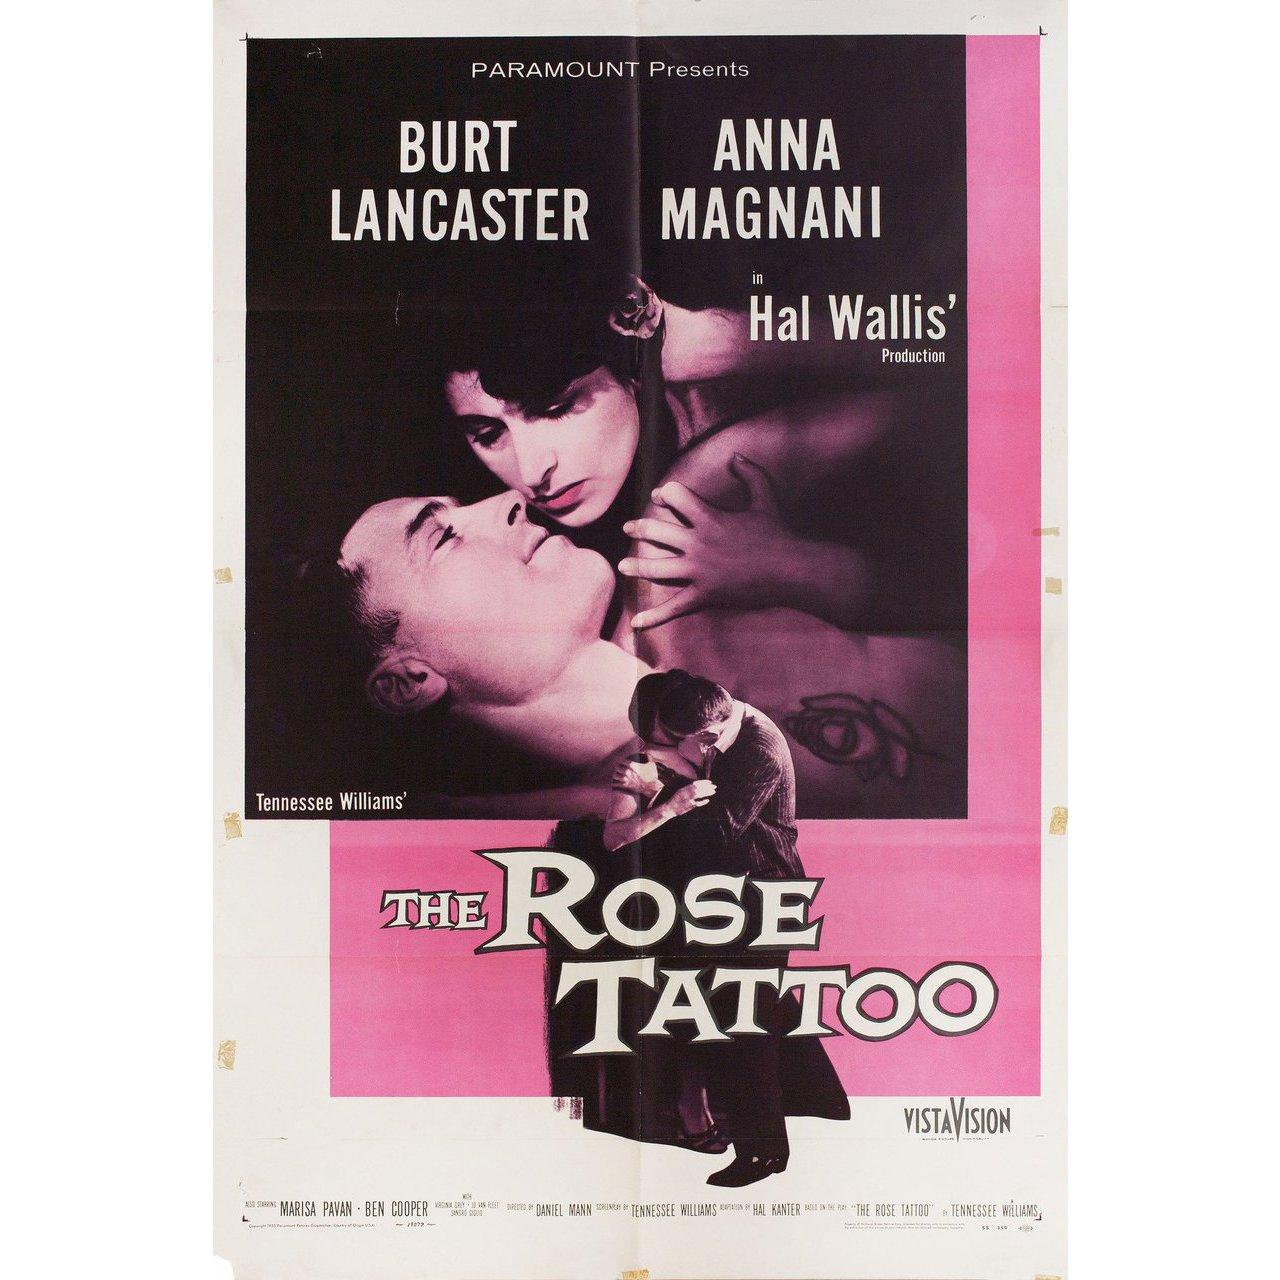 Original 1955 U.S. one sheet poster for the film The Rose Tattoo directed by Daniel Mann with Anna Magnani / Burt Lancaster / Marisa Pavan / Ben Cooper. Very good condition, folded with tape stains. Many original posters were issued folded or were